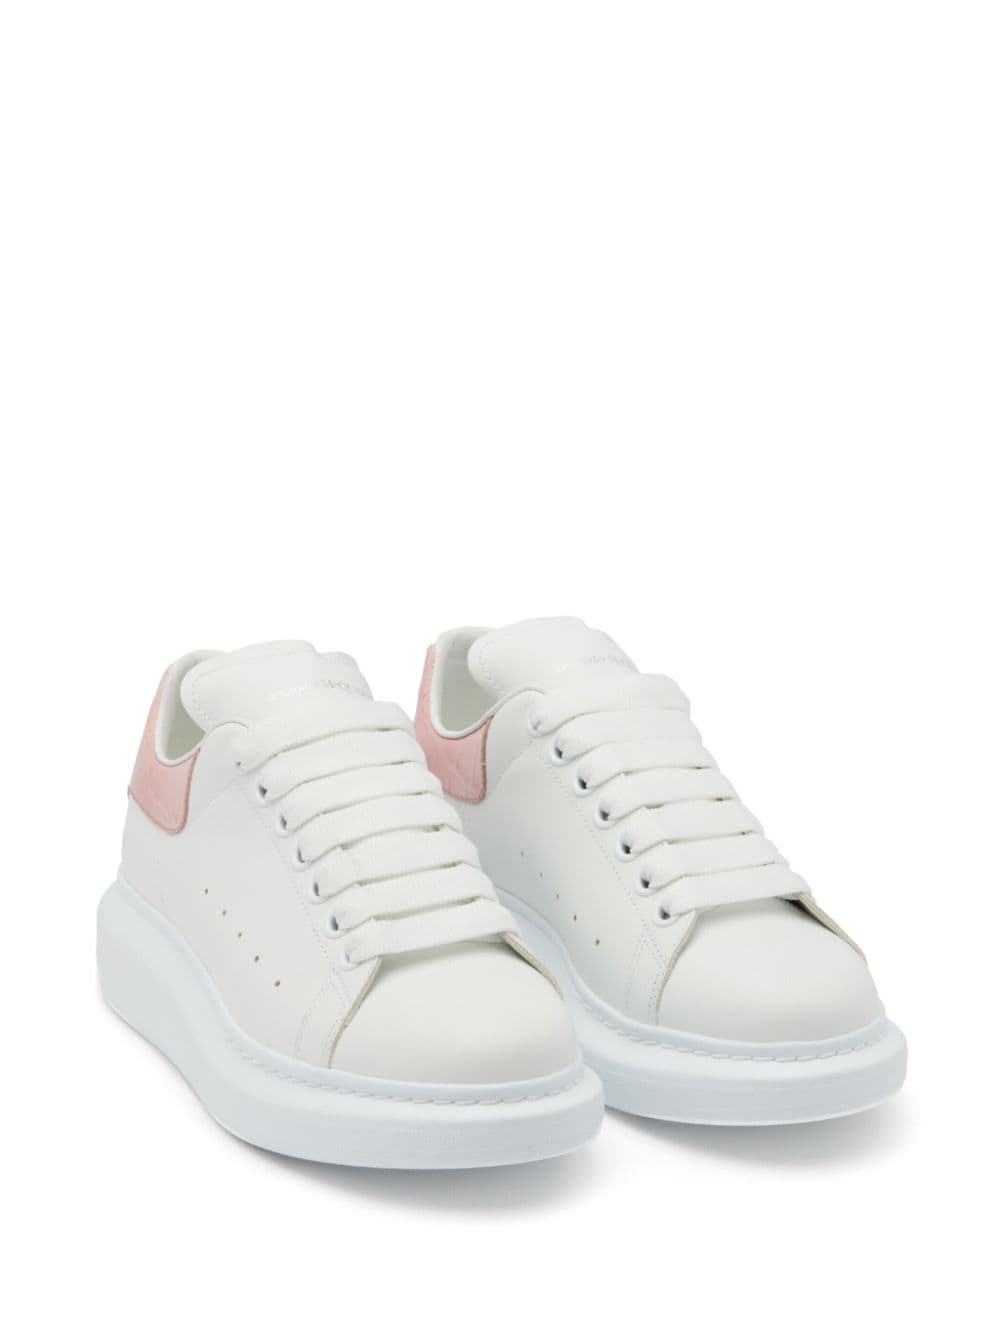 Oversized leather sneakers<BR/><BR/><BR/>